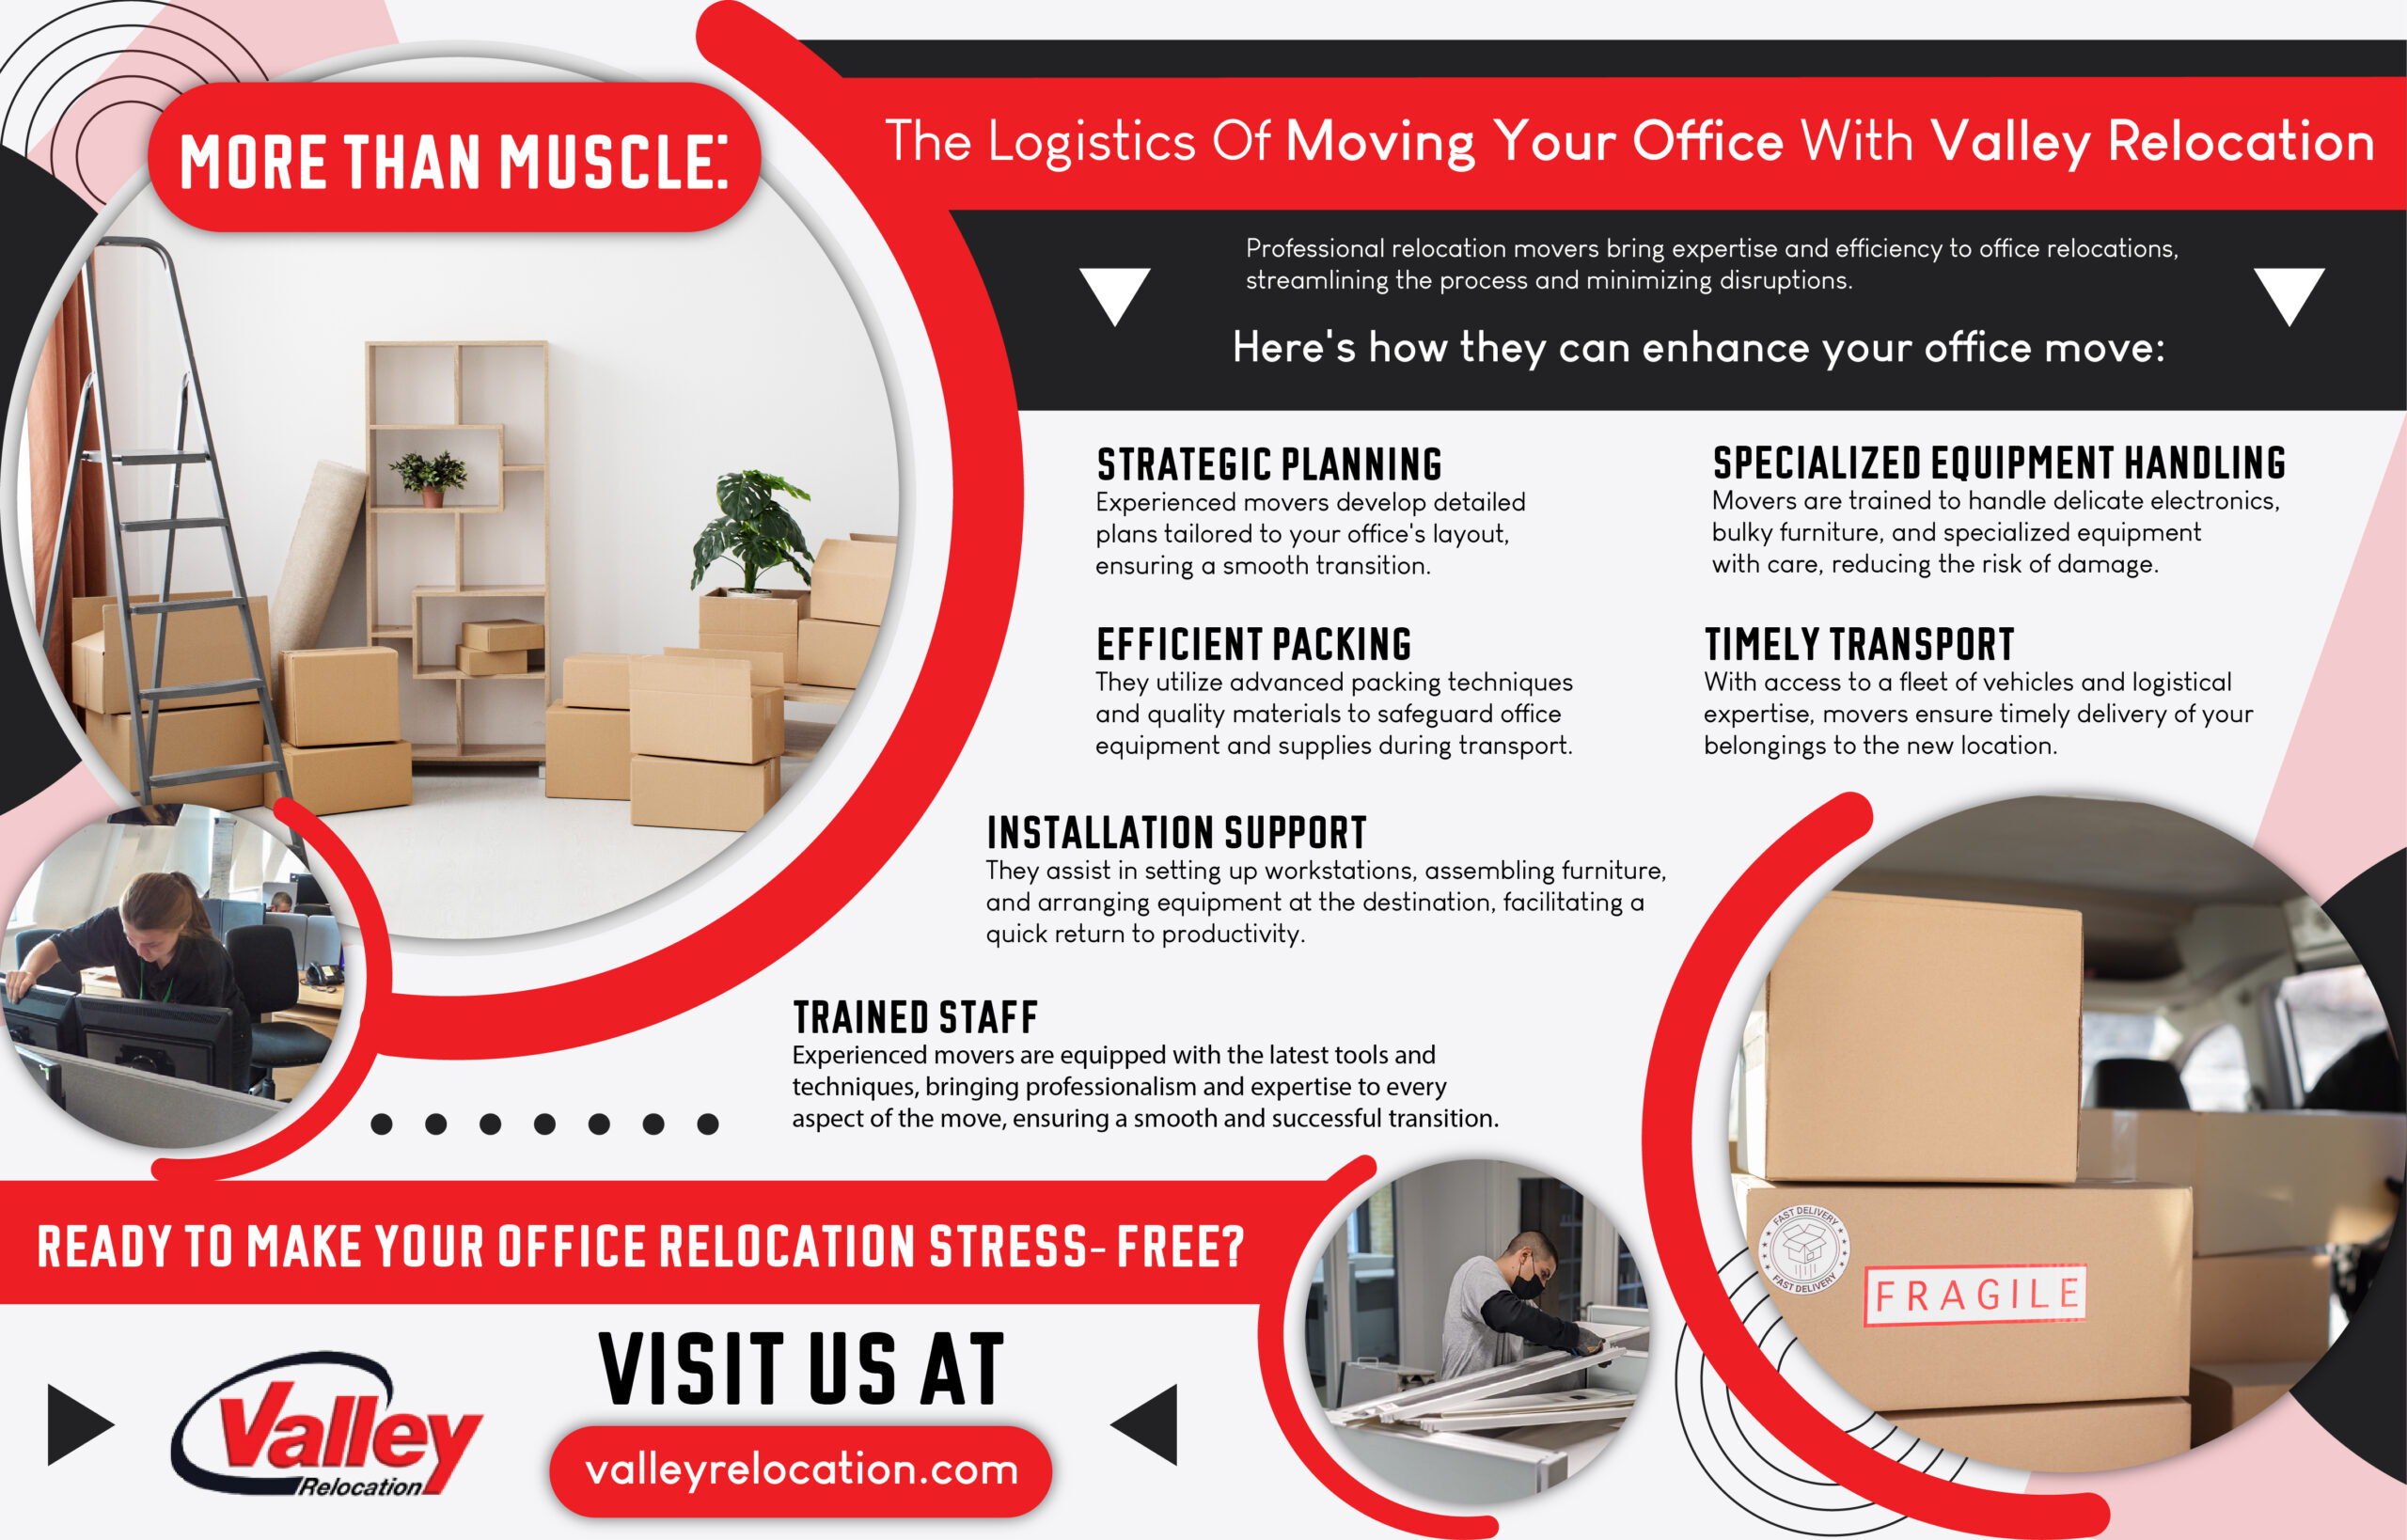 More Than Muscle: The Logistics Of Moving Your Office With Valley Relocation